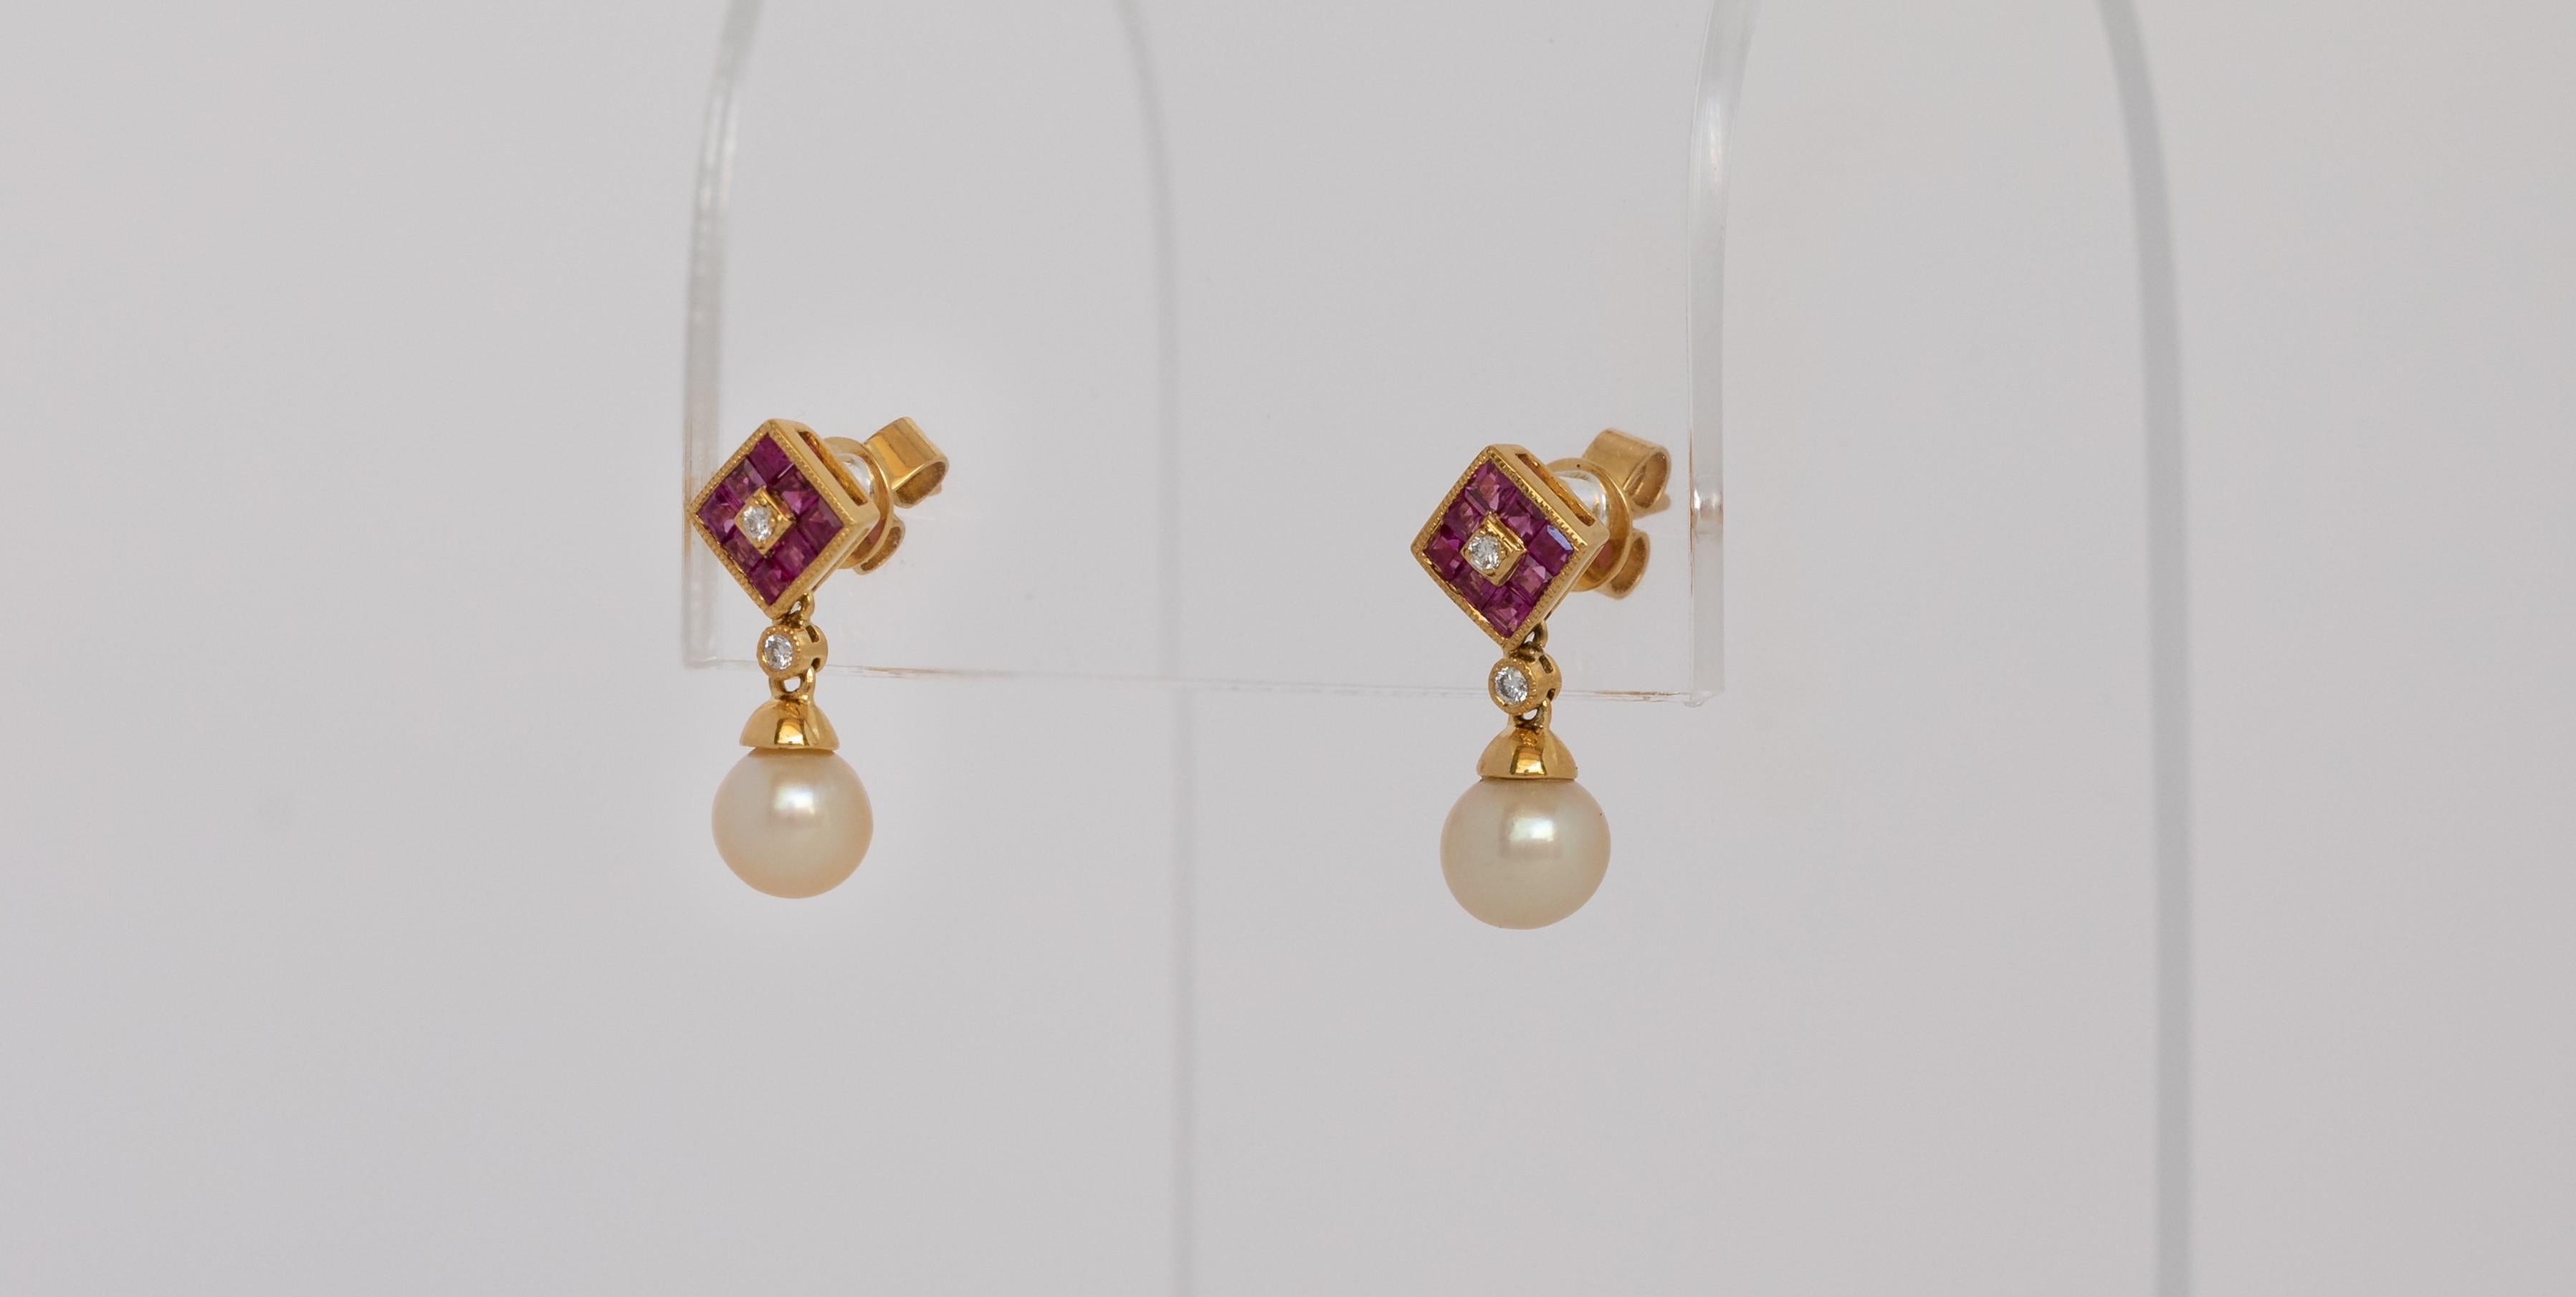 Certified Natural Bahraini Pearls Earrings with Rubies and Diamonds in 18Kt Gold In New Condition For Sale In Manama, BH